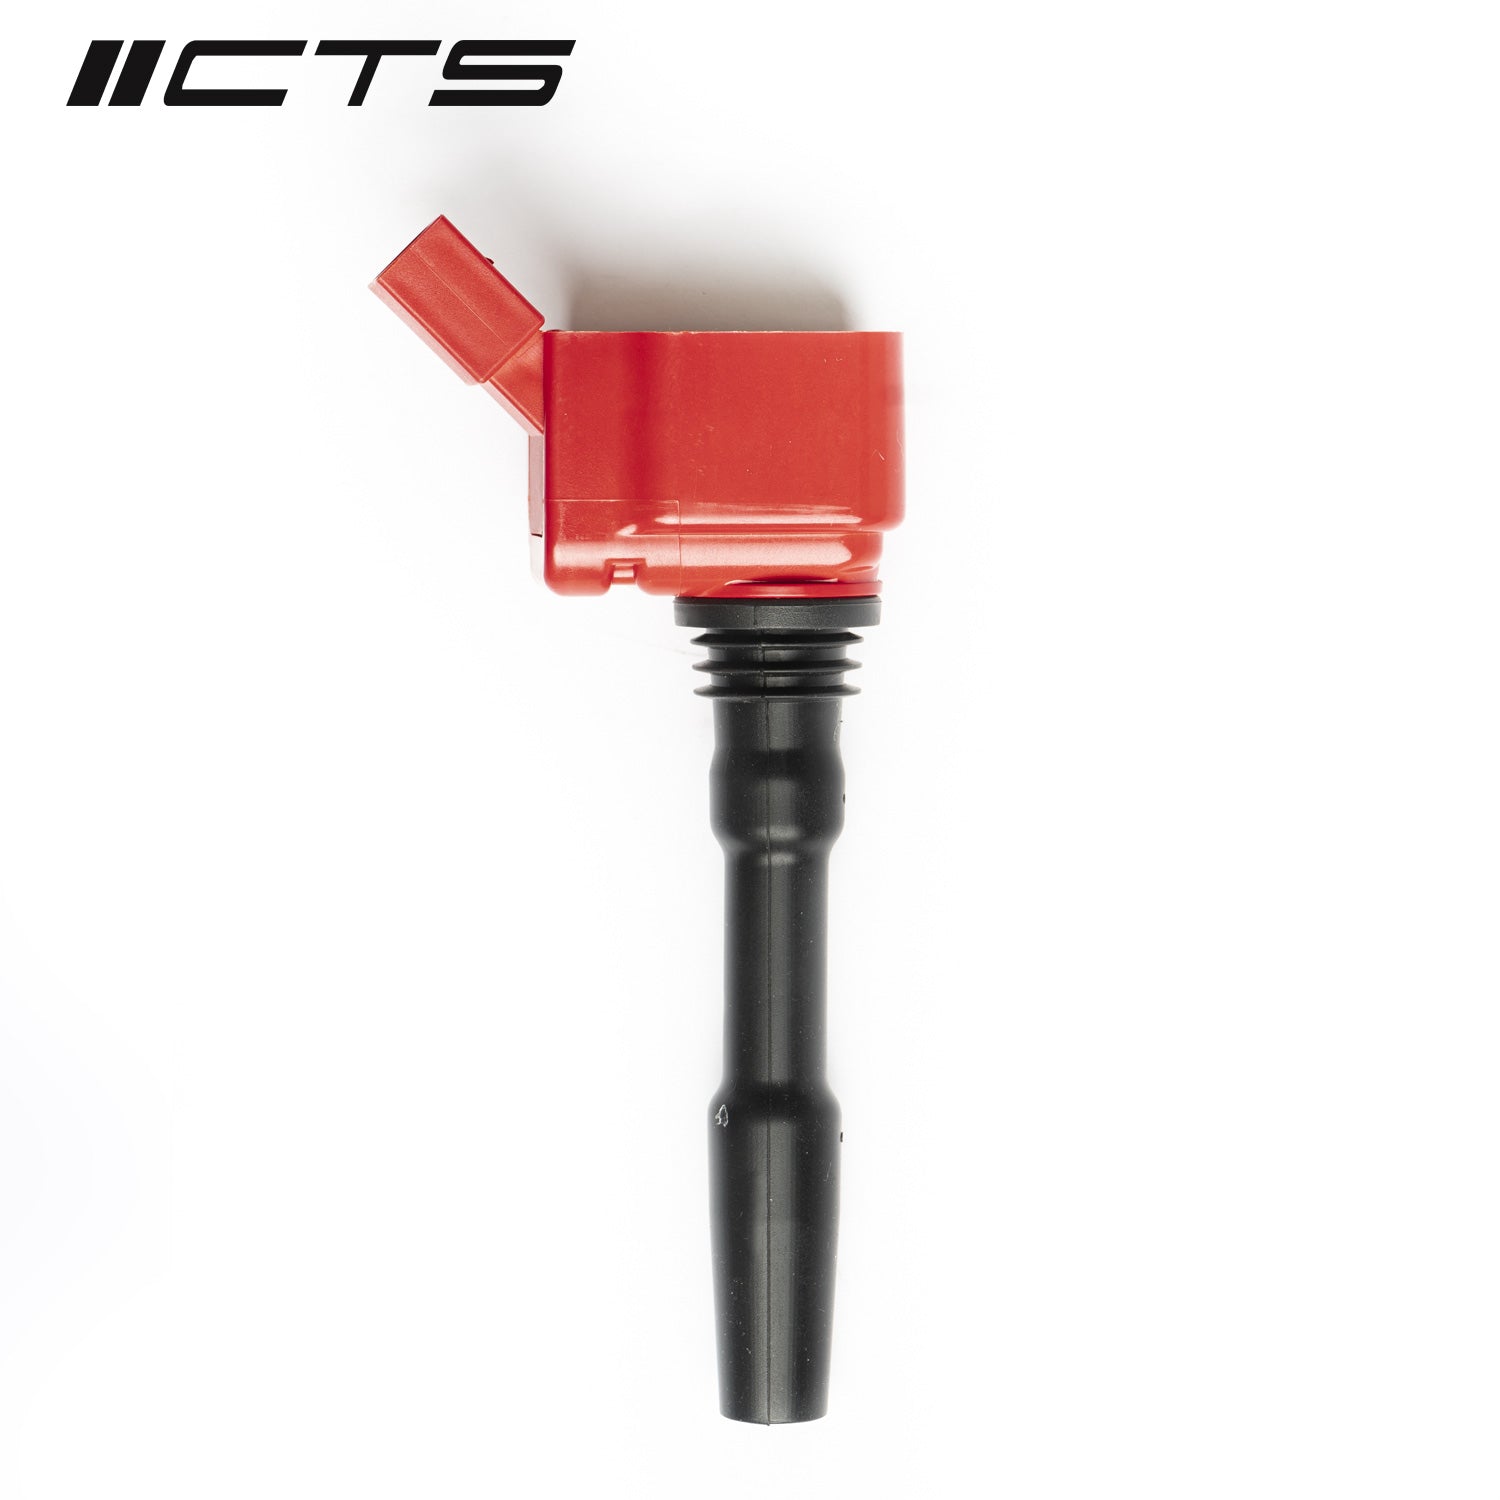 CTS TURBO HIGH PERFORMANCE IGNITION COIL FOR GEN3 TSI ENGINES (1.8T/2.0T/2.5T/3.0T/4.0T) - 0